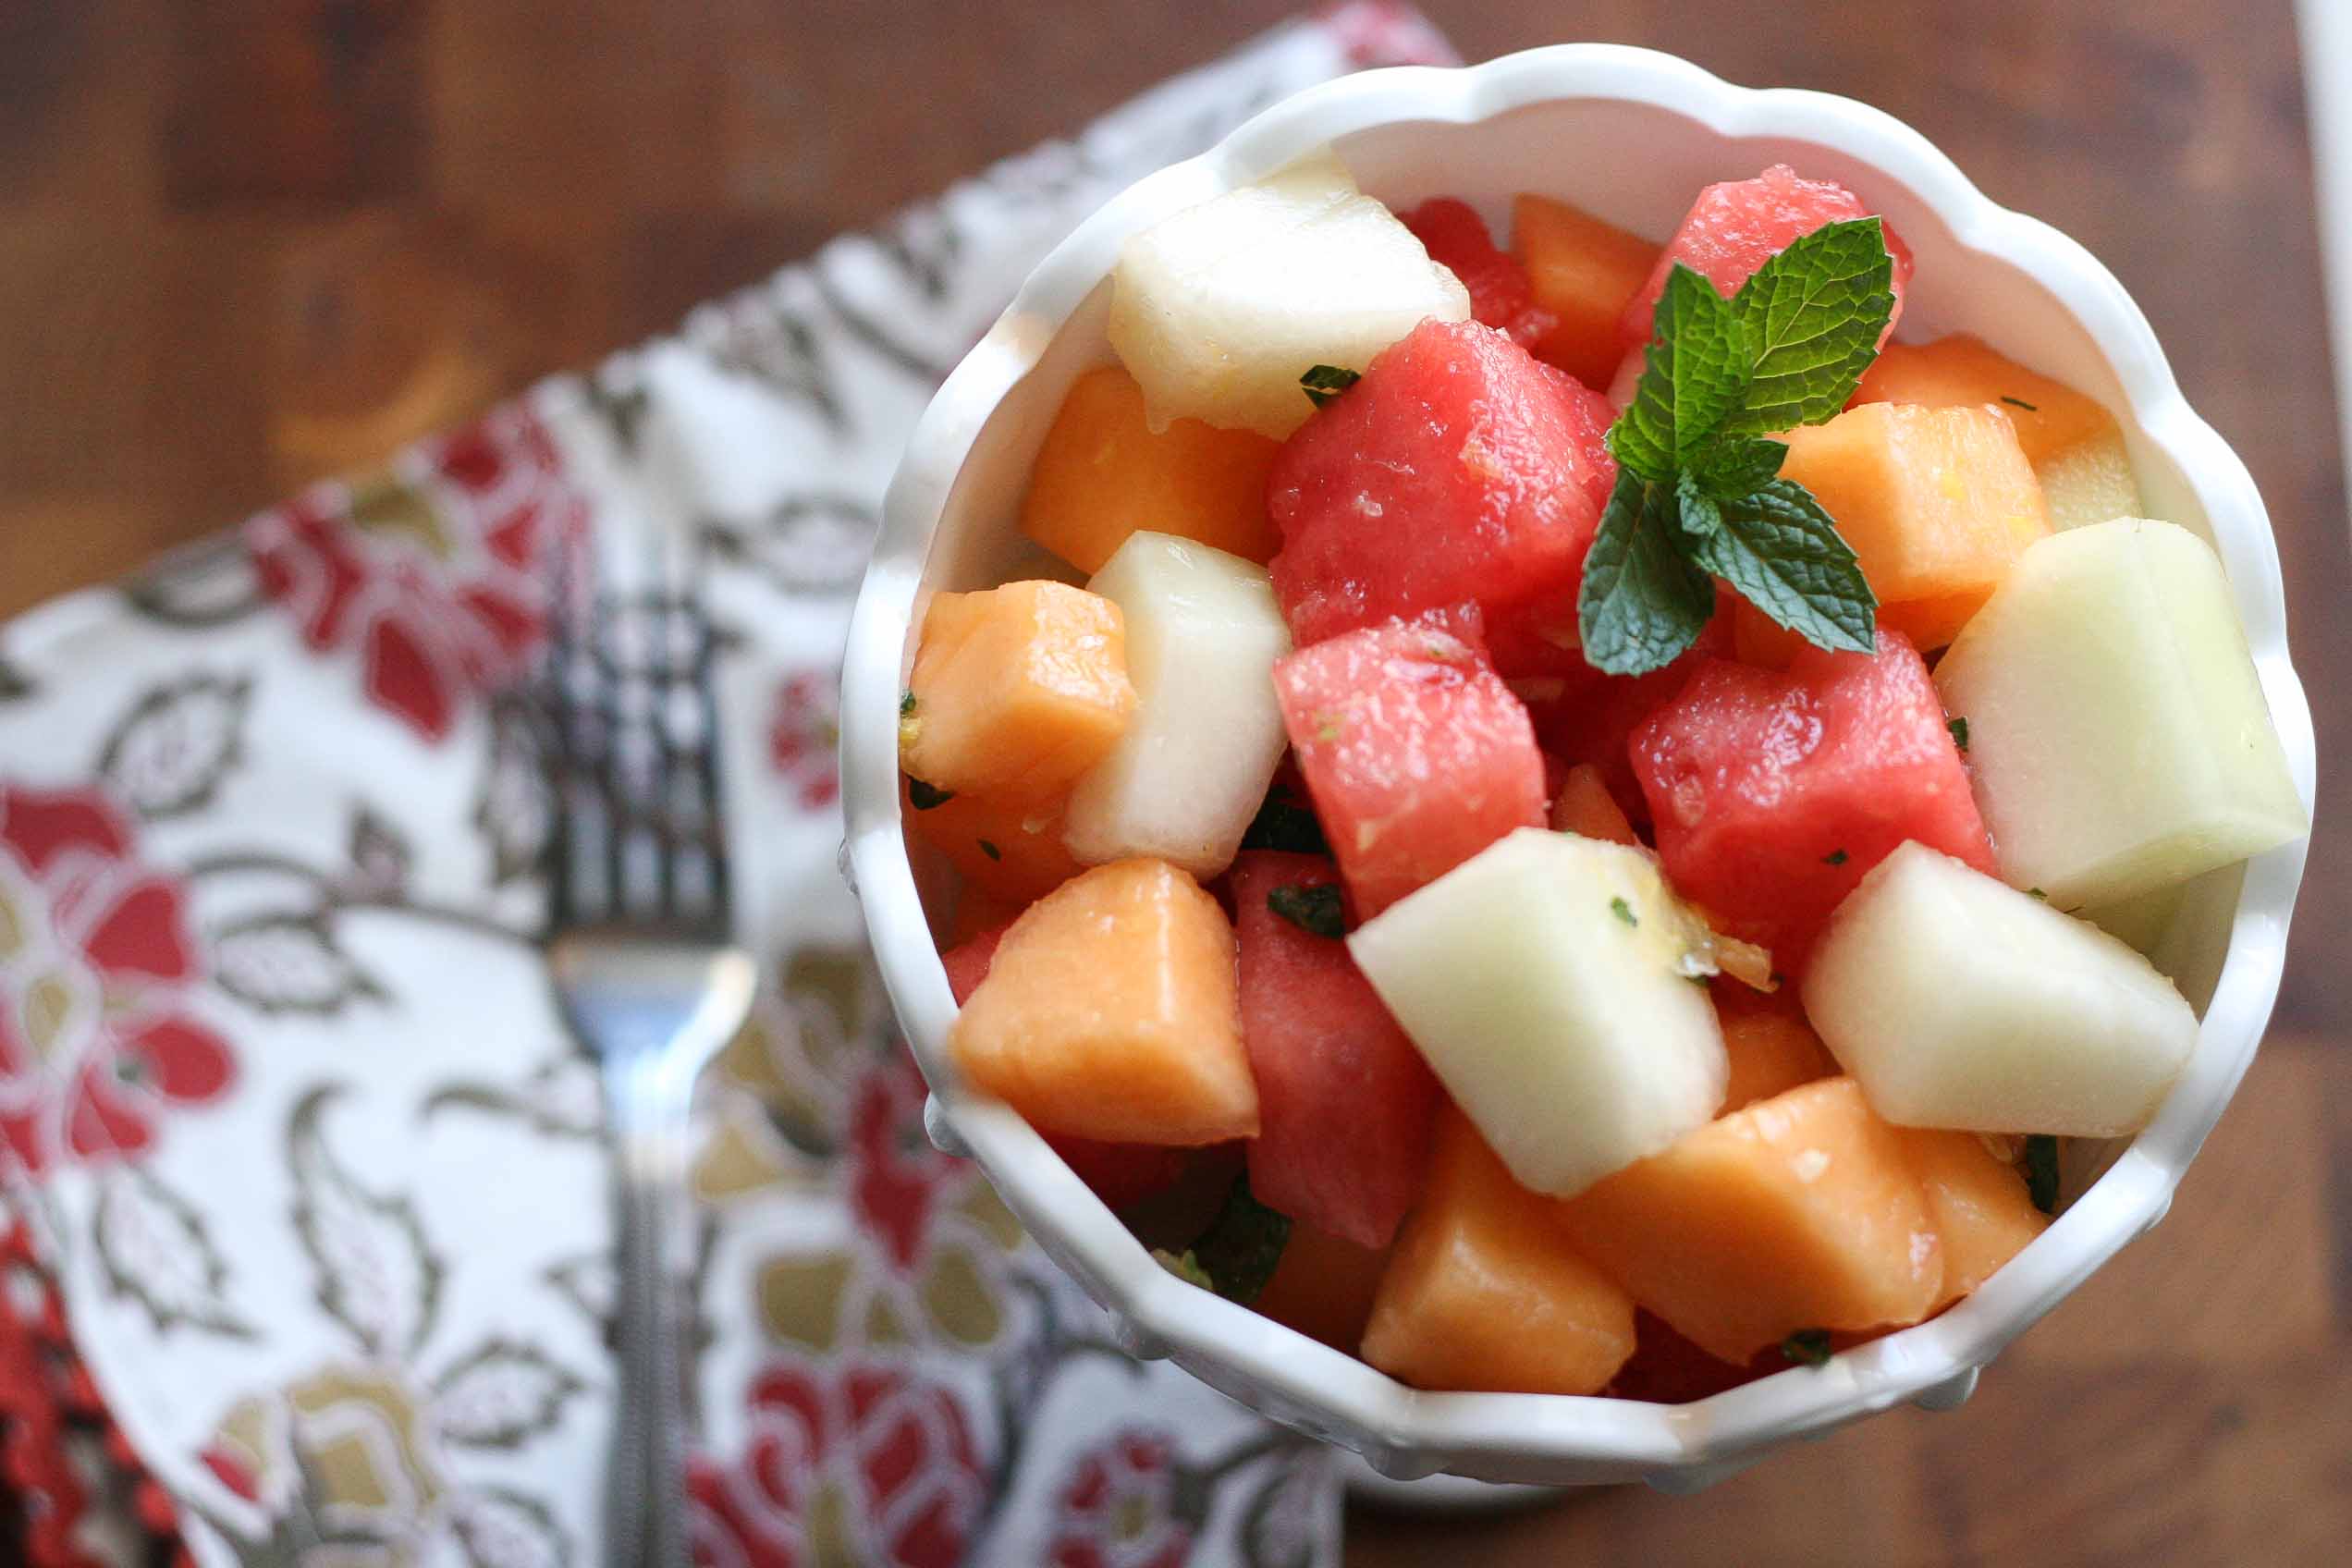 Tasty Kitchen Blog: Melon Salad. Guest post and recipe submitted by Natalie Perry of Perry's Plate.